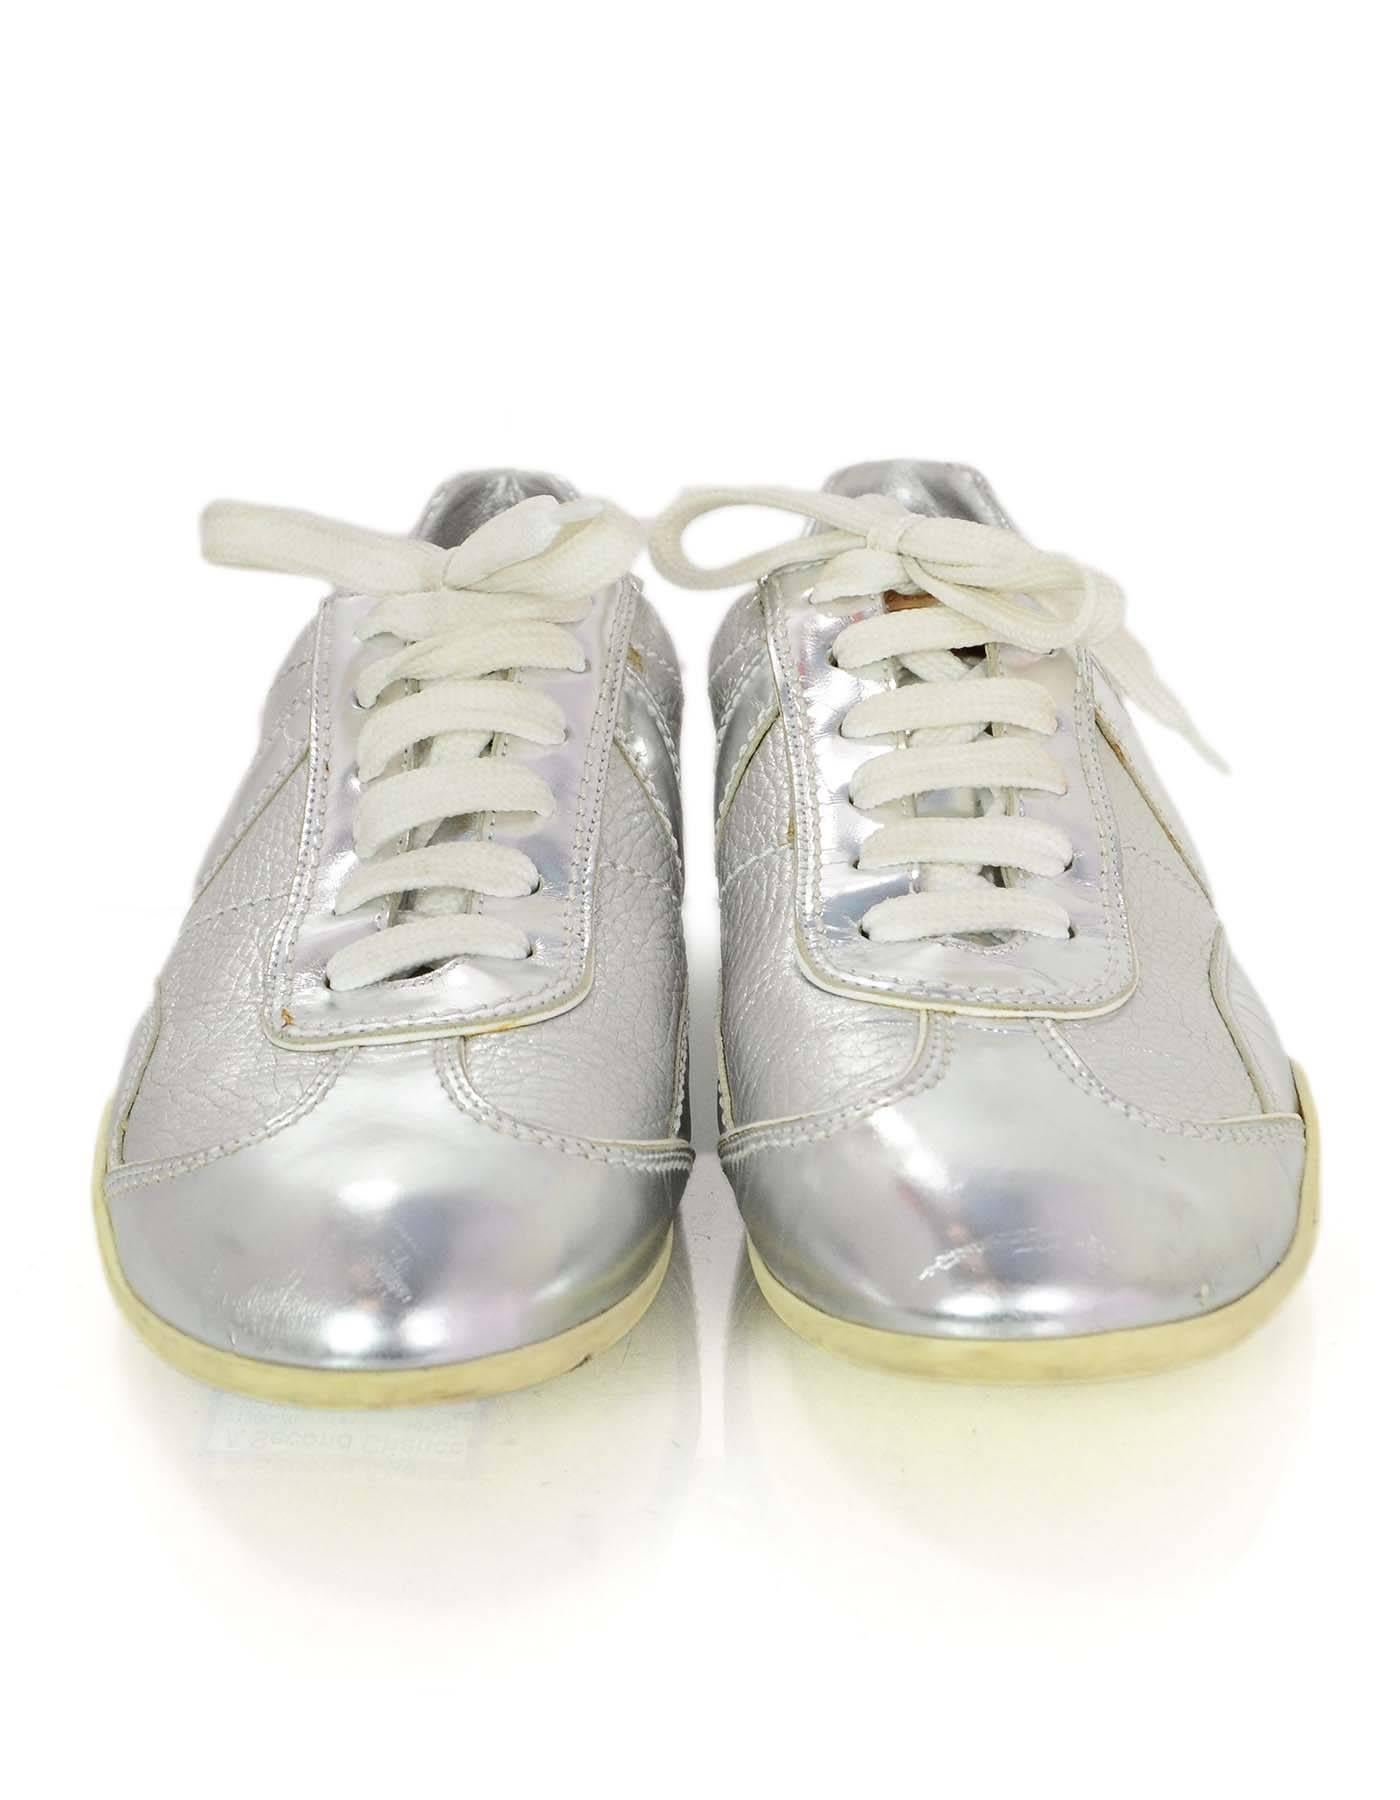 100% Louis Vuitton Silver Leather Sneakers sz 37. Features mixed texture silver leather with embroidered 